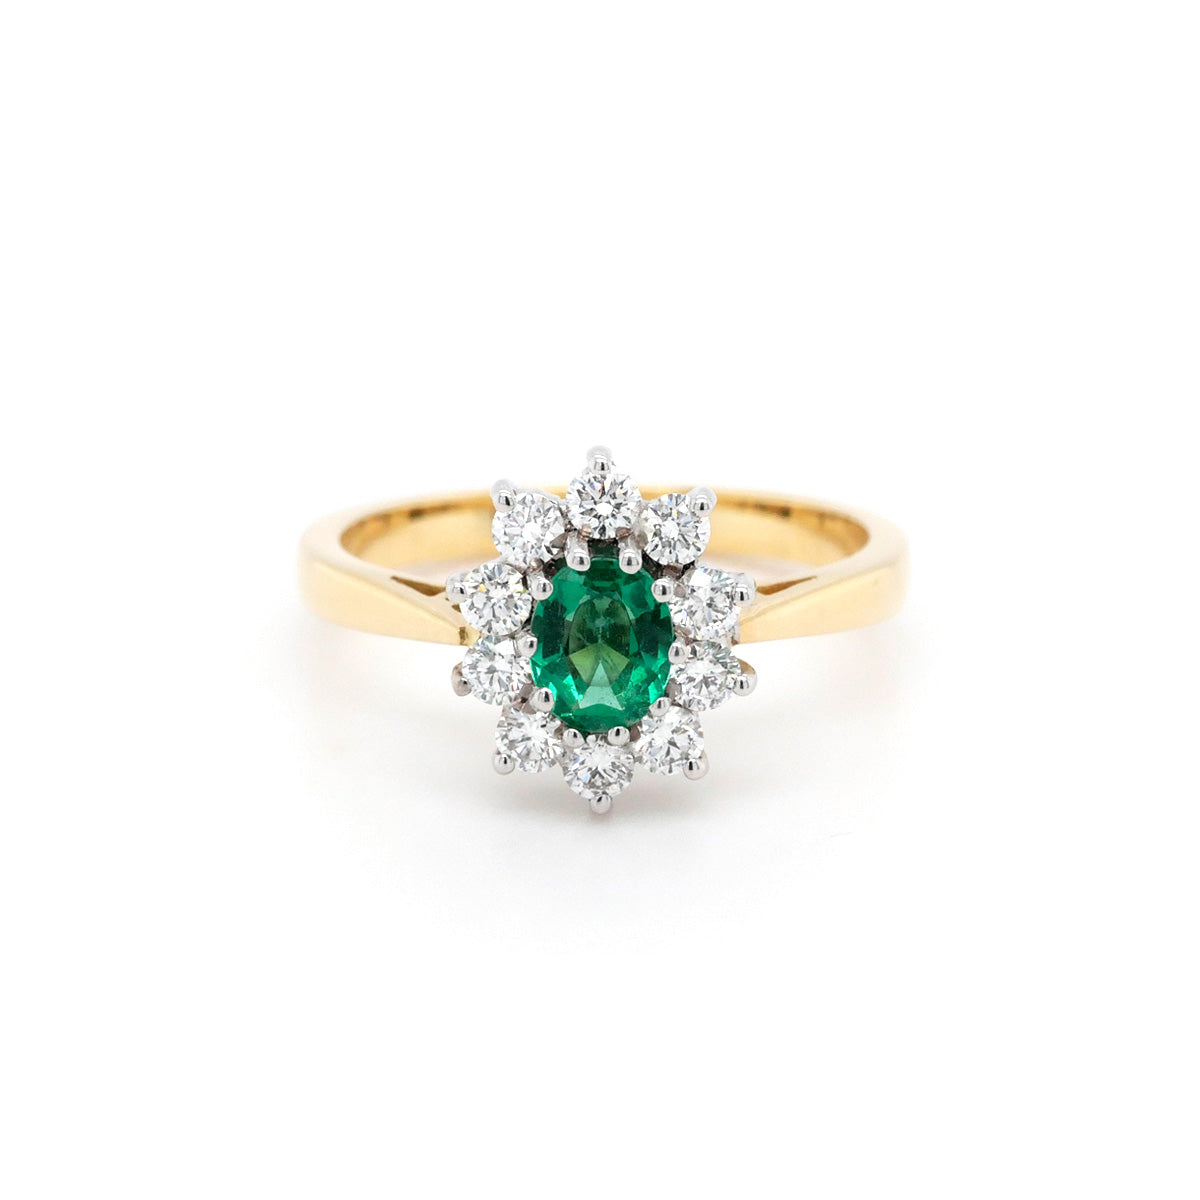 18ct Yellow & White Gold Emerald & Diamond Cluster Ring - Size M